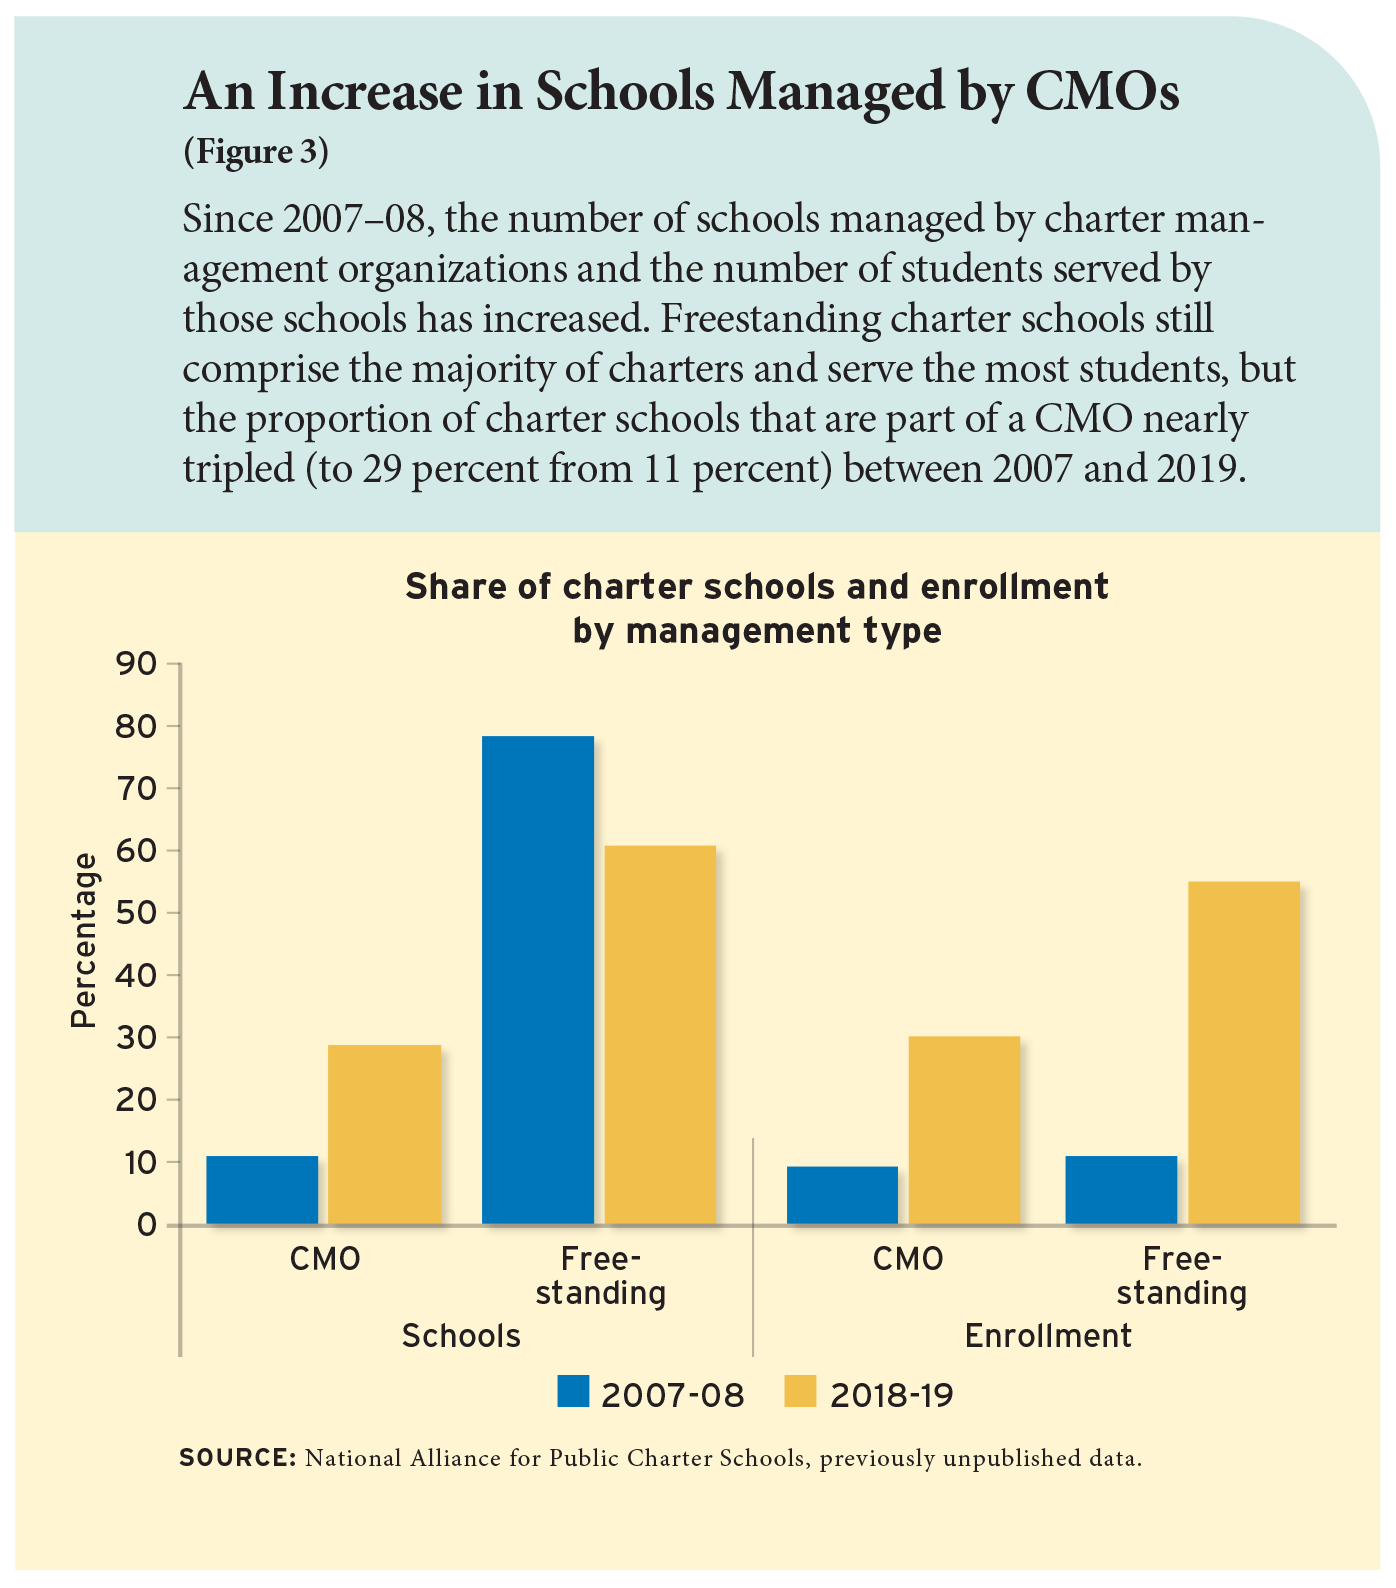 An Increase in Schools Managed by CMOs (Figure 3)